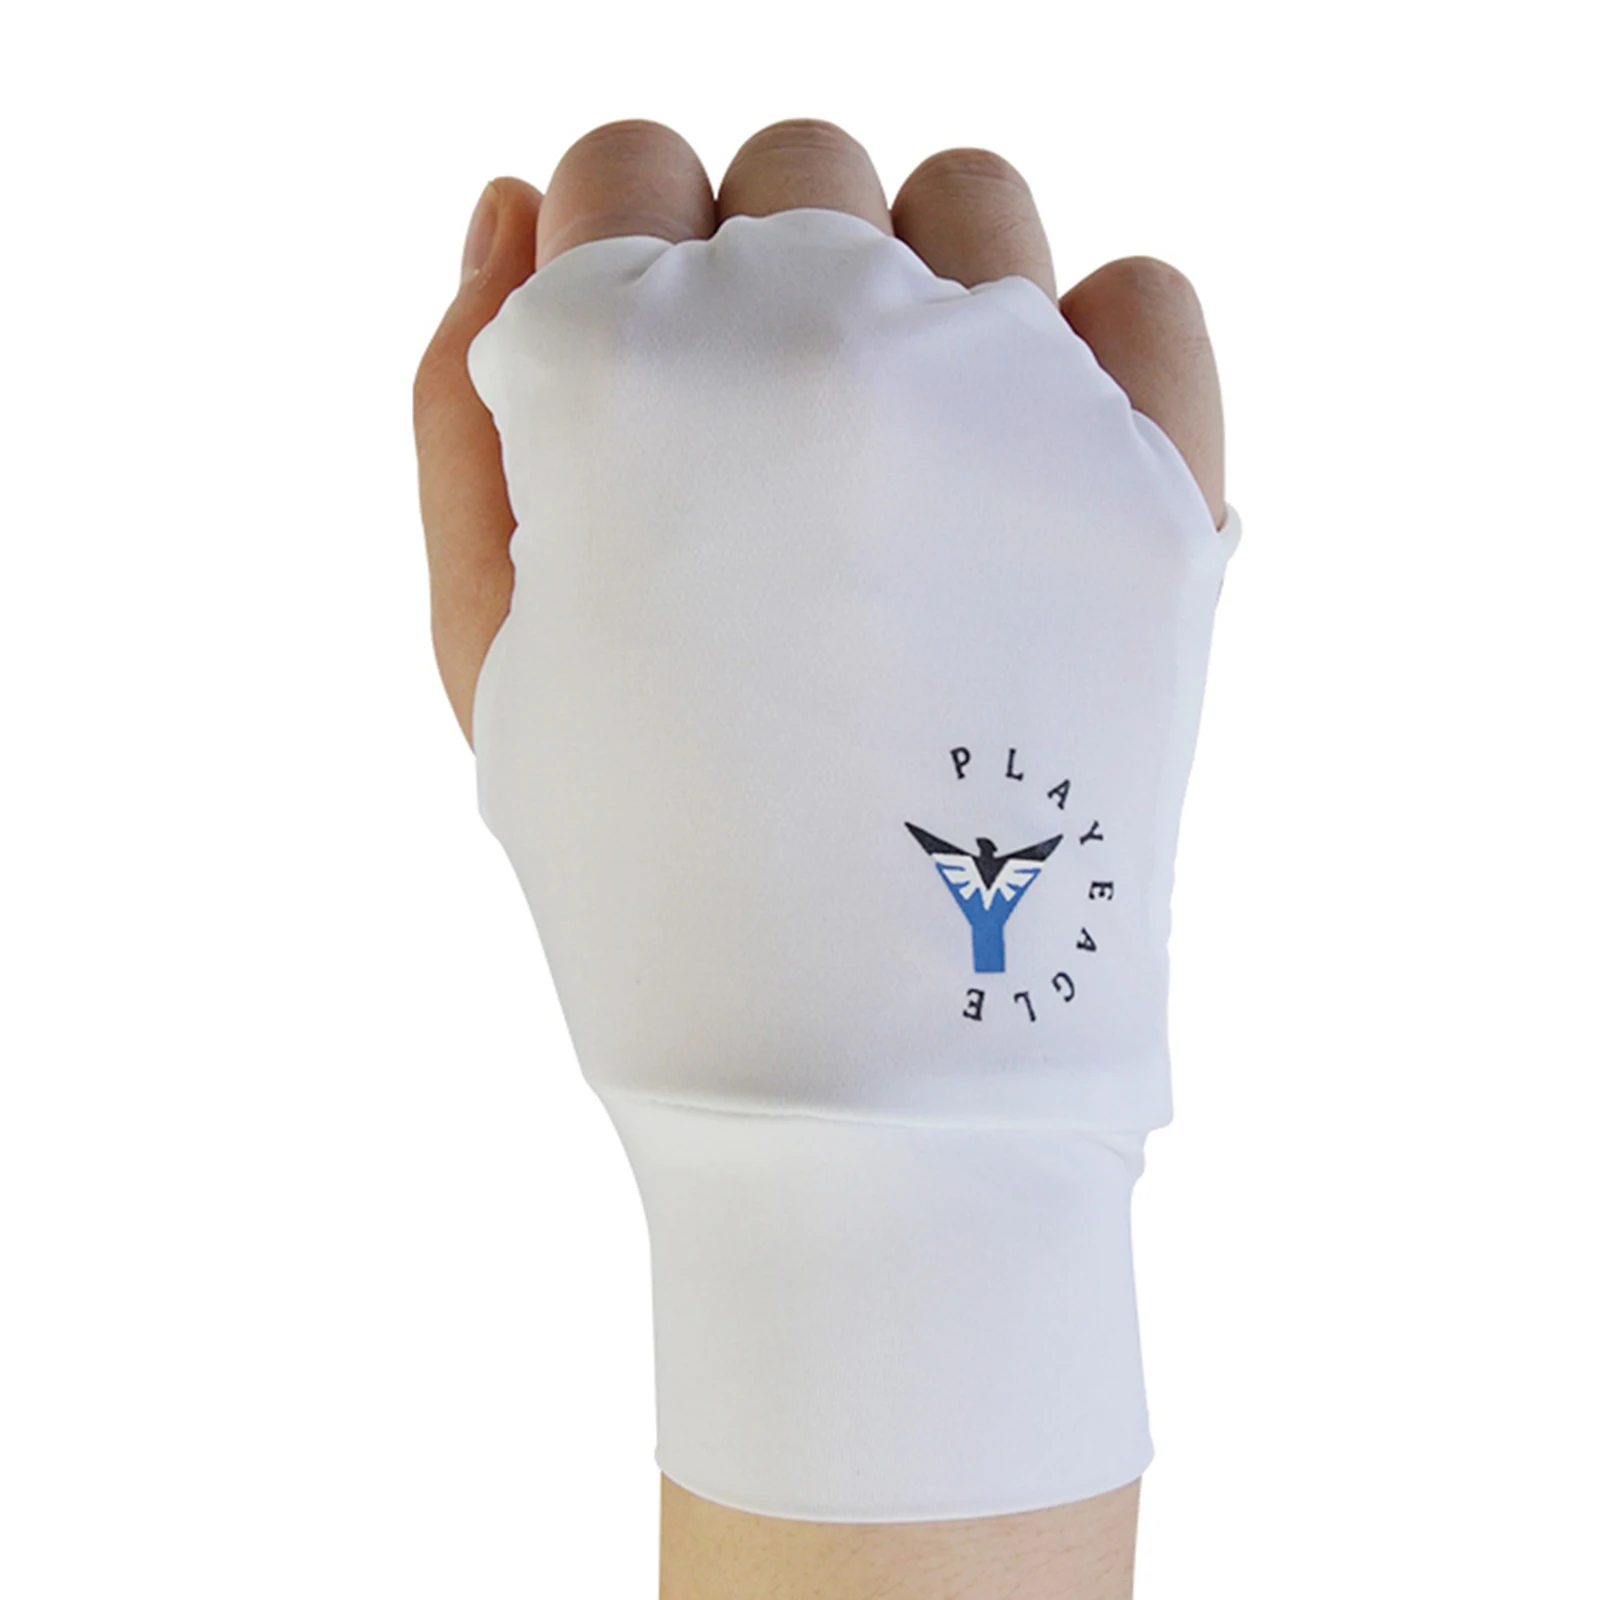 Golf Glove Right Left Handed Sun UV Protector Golf Open fingered ice silk sunscreen half cool and breathable for men and women